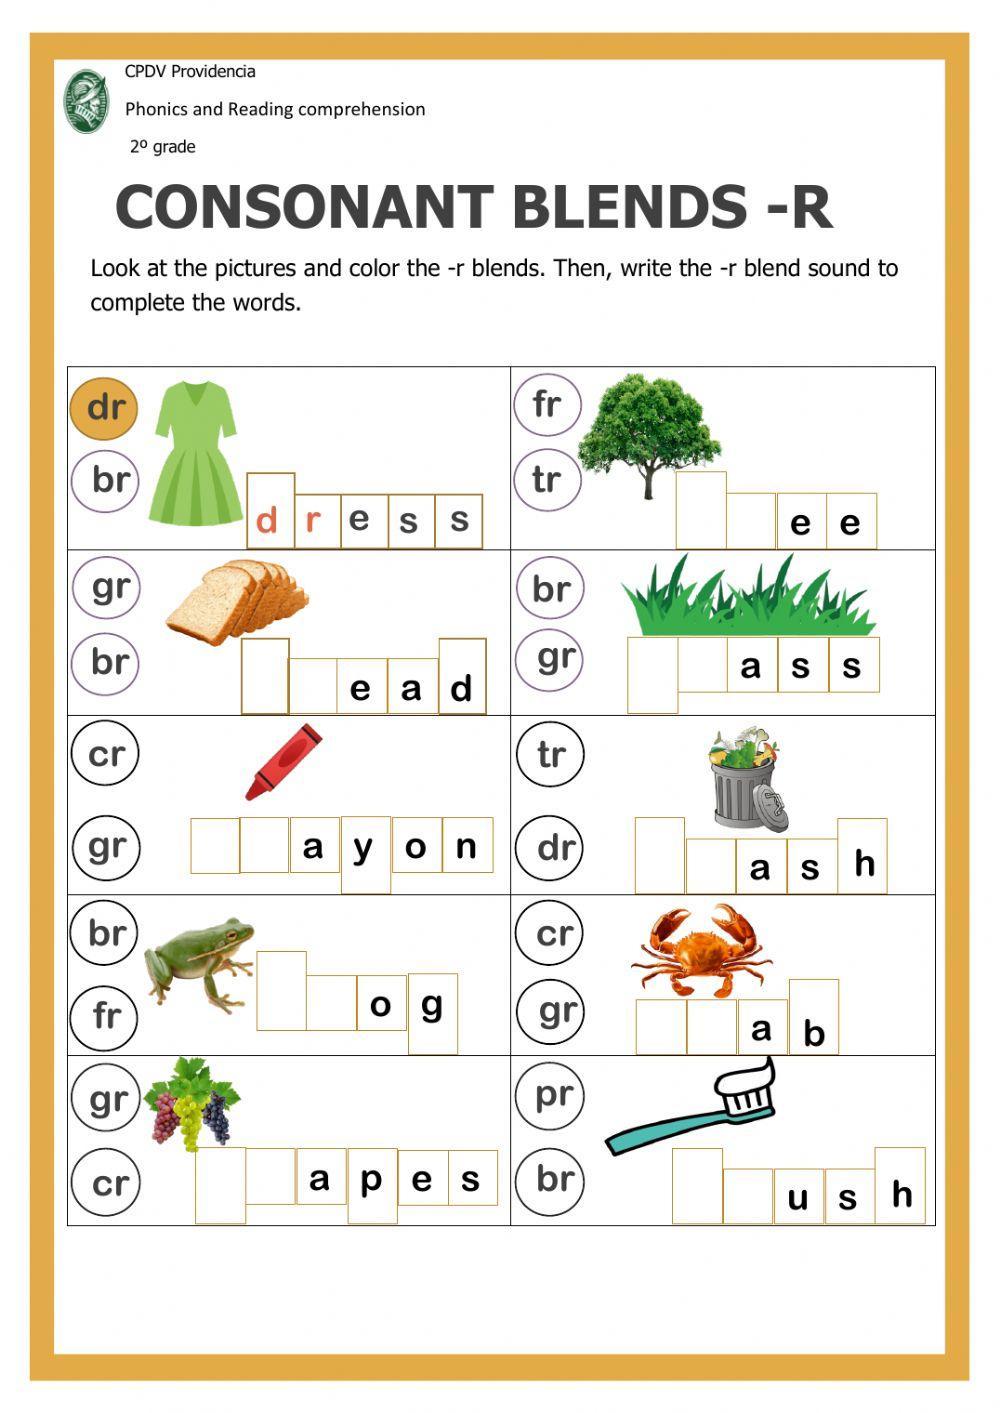 Consonant blends with -r